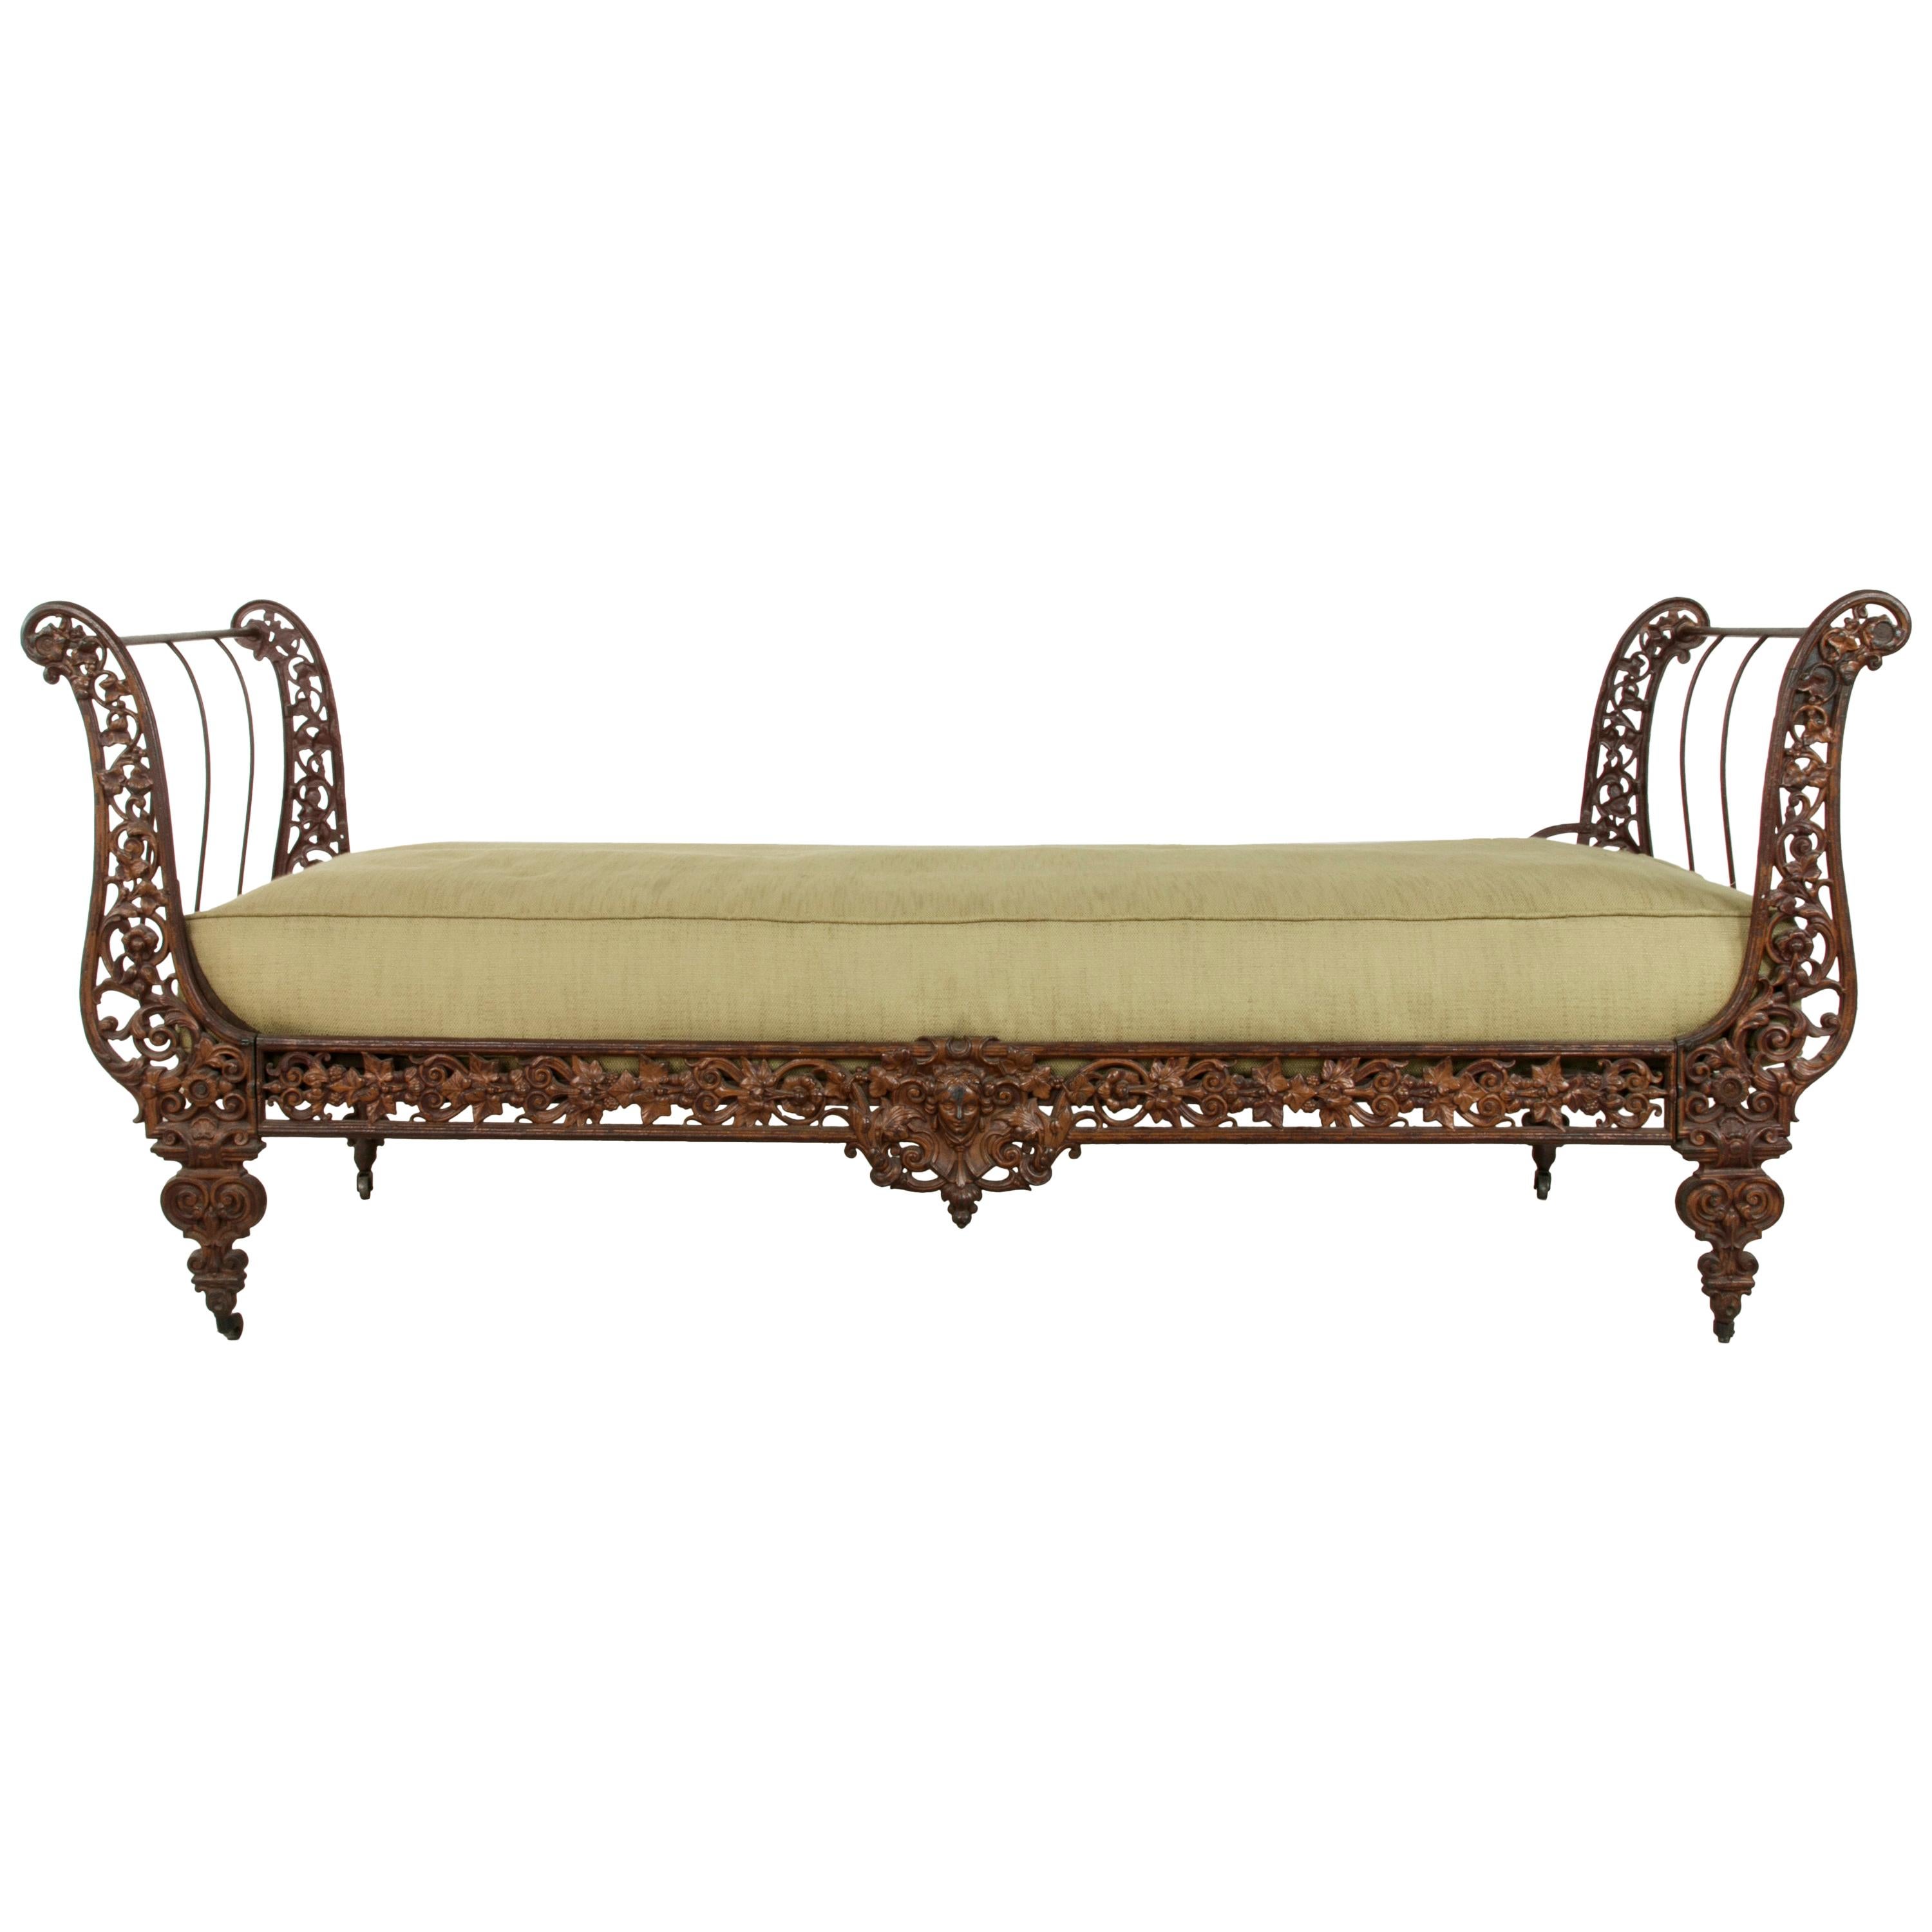 19th Century French Napoleon III Period Cast Iron Daybed or Sleigh Bed